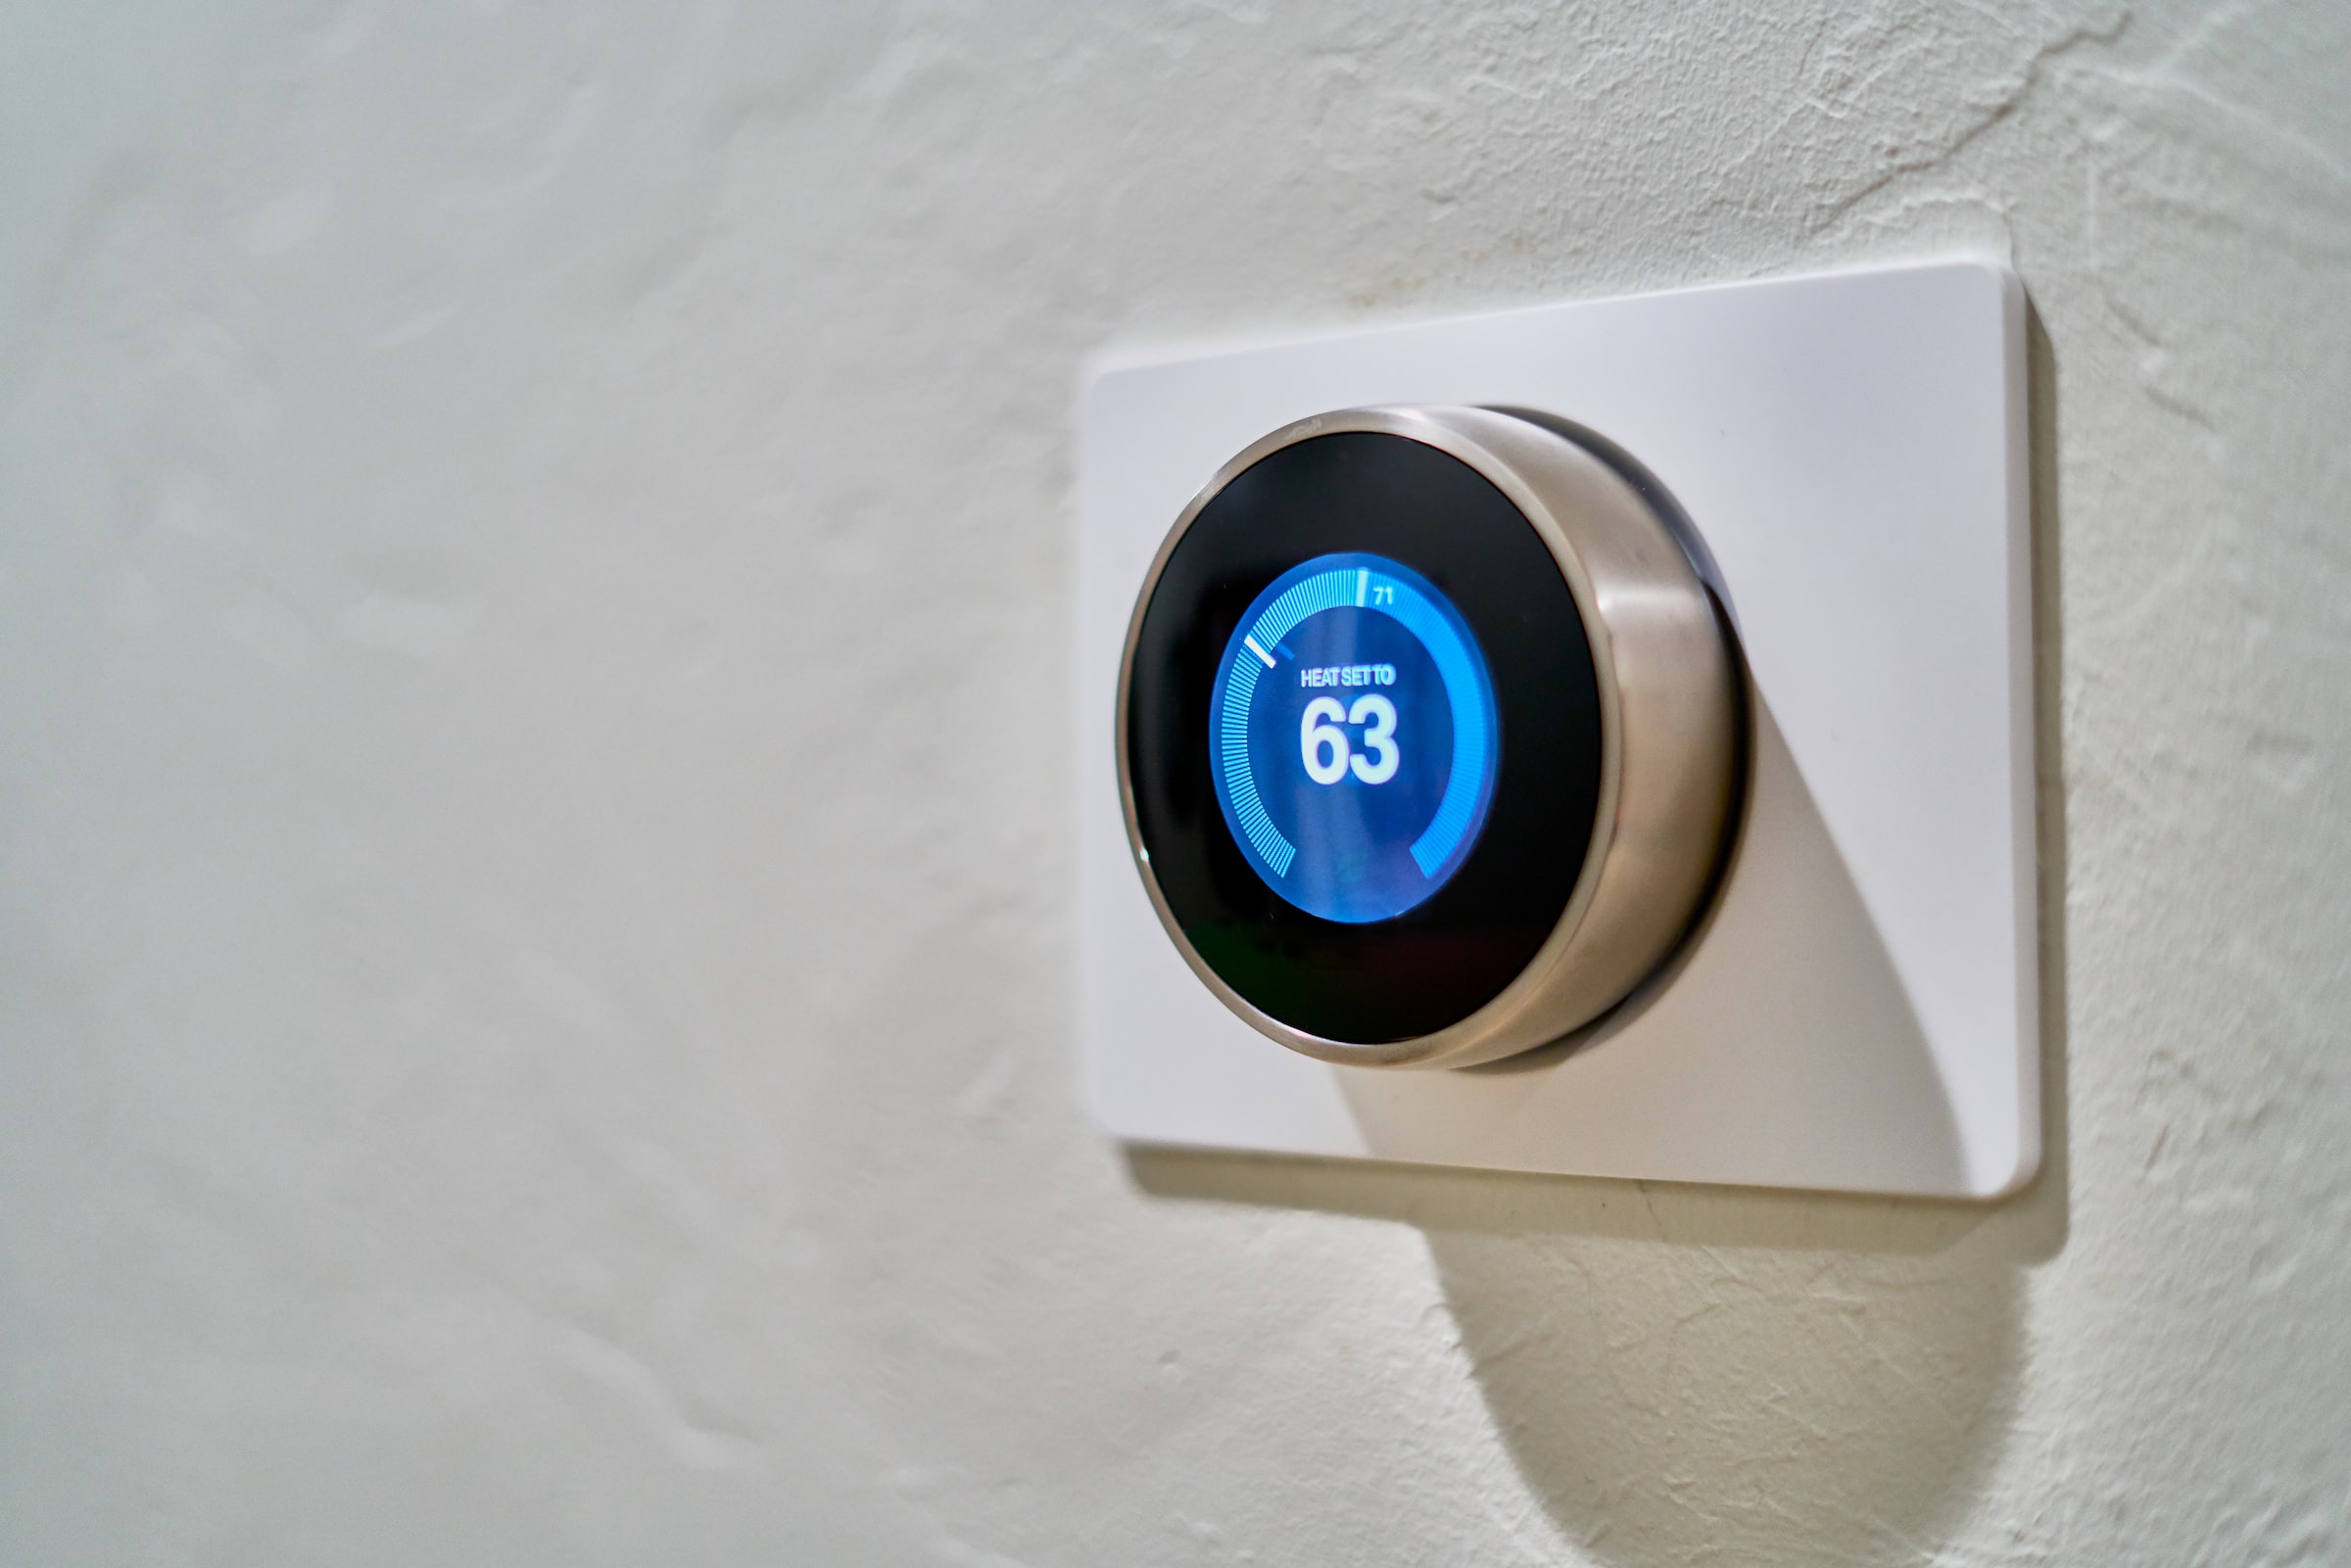 A smart thermostat display